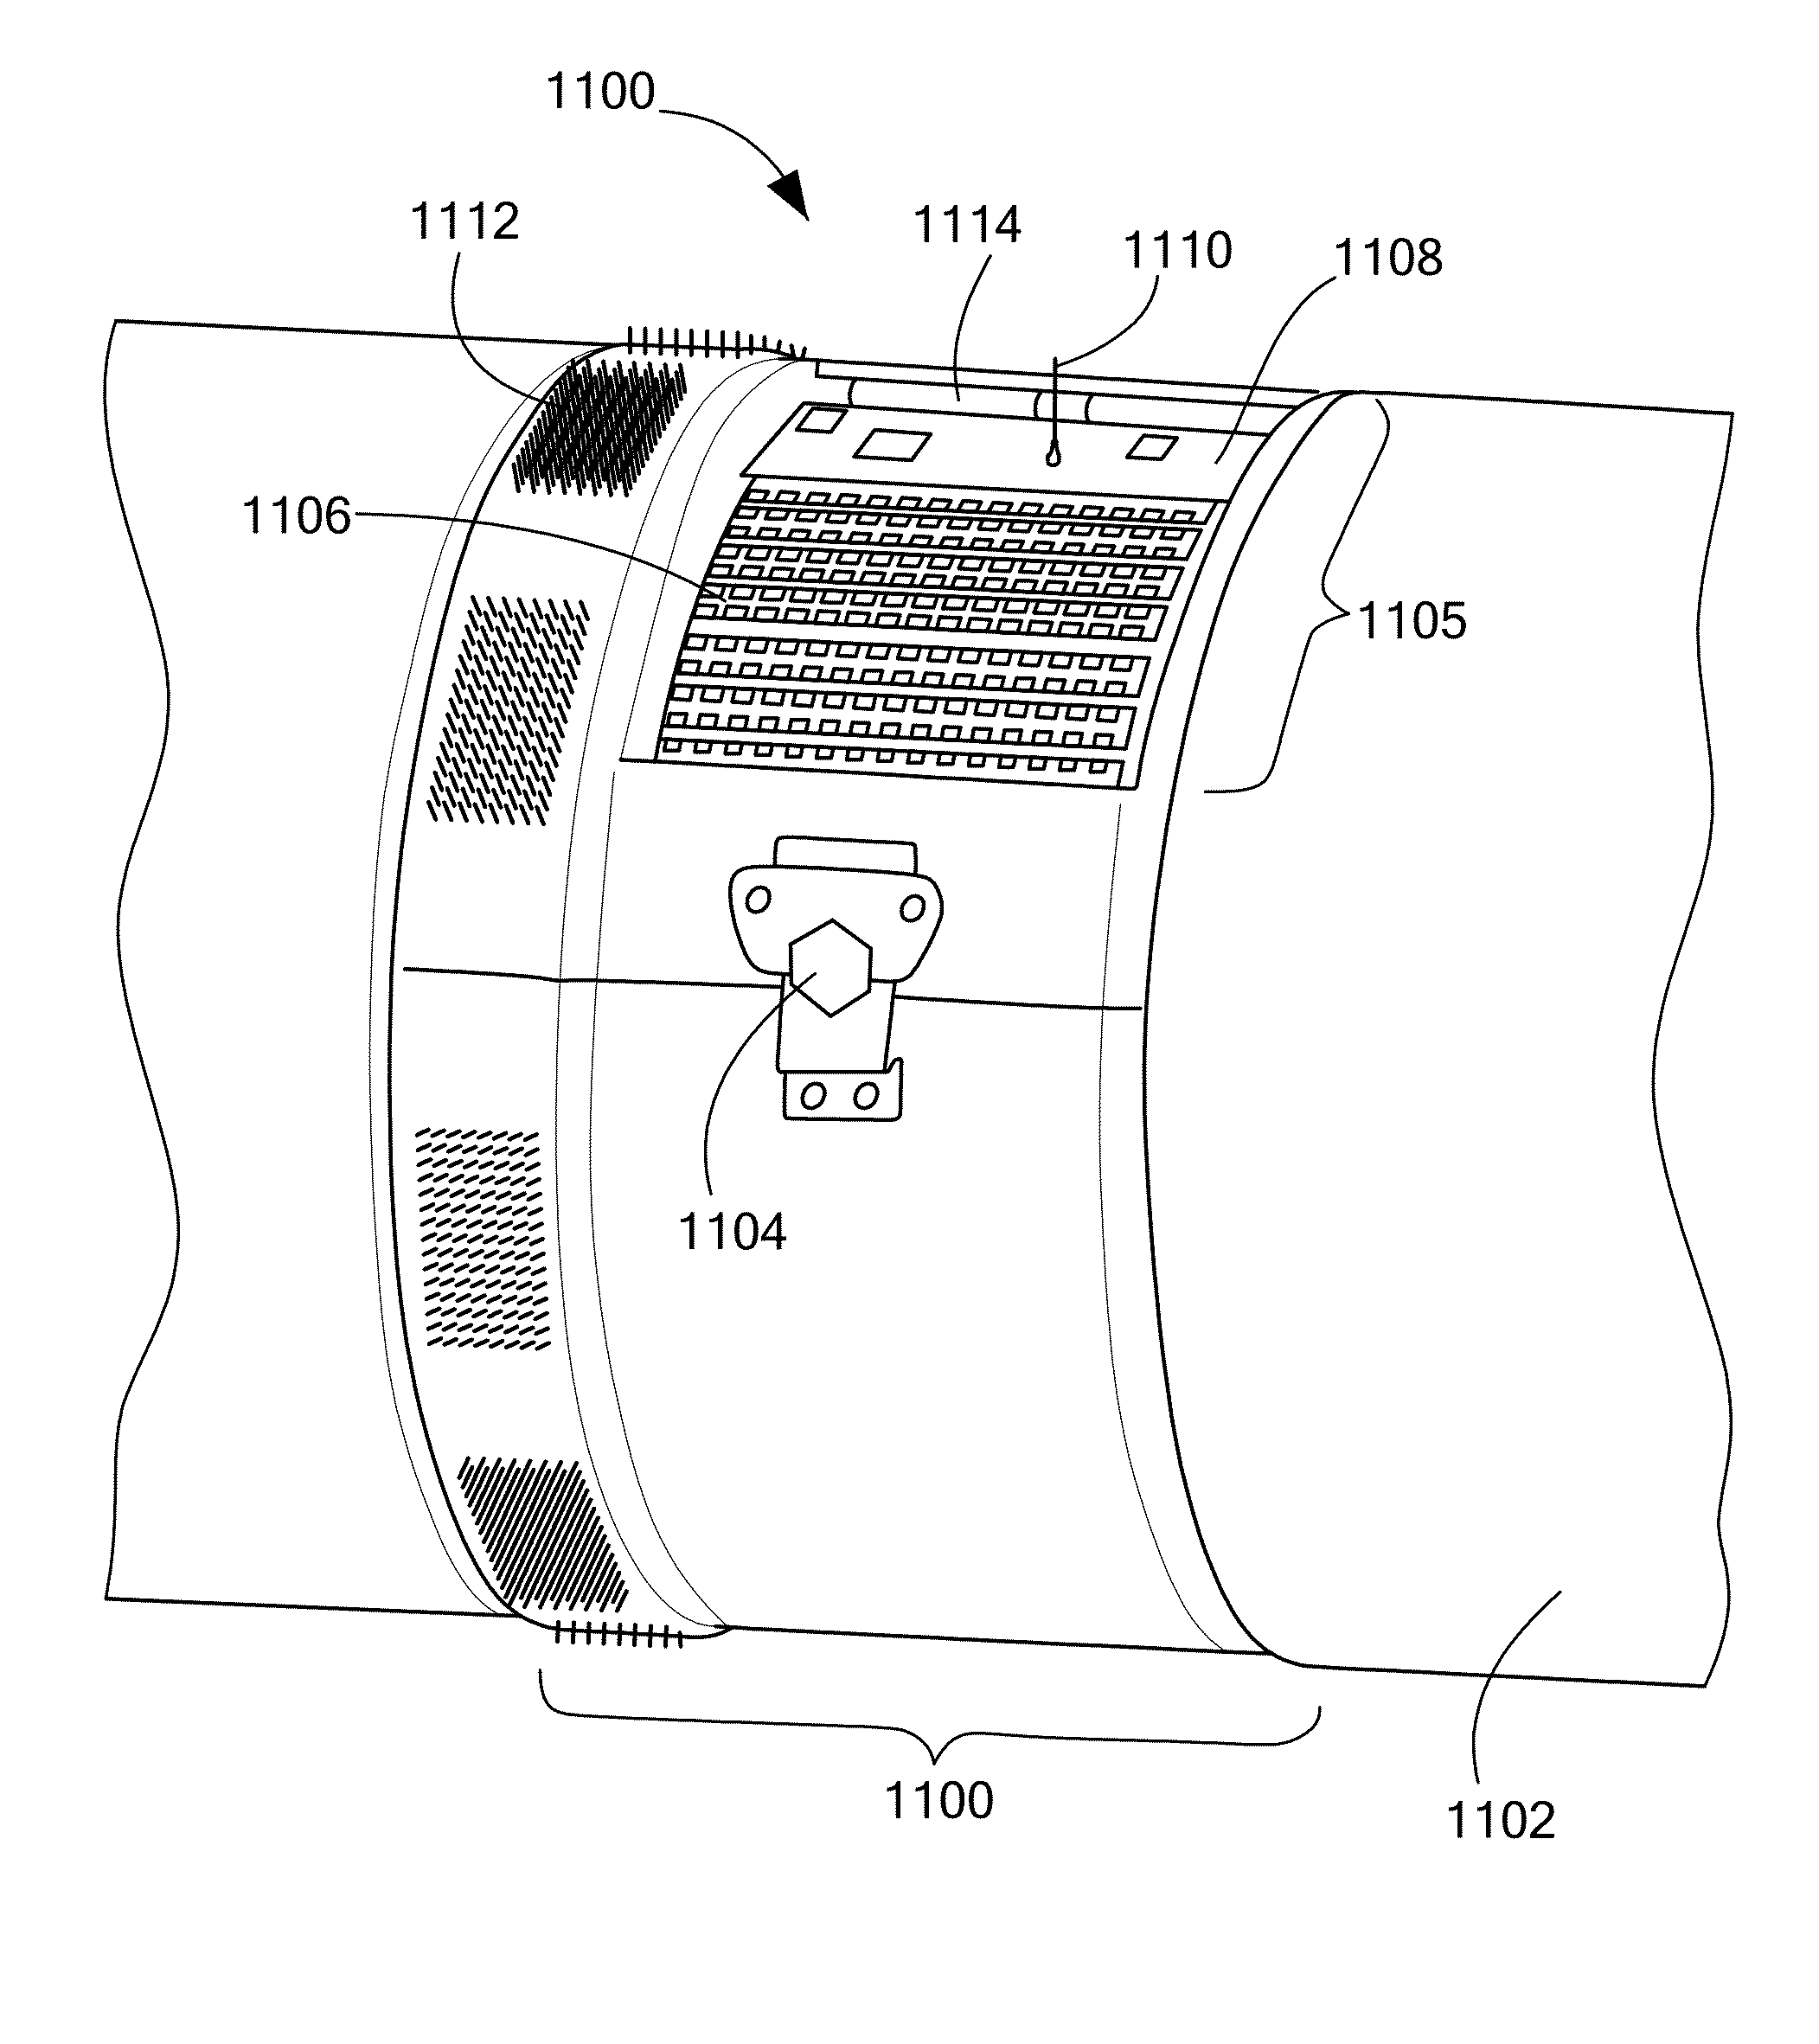 System and Method of Measuring Defects in Ferromagnetic Materials